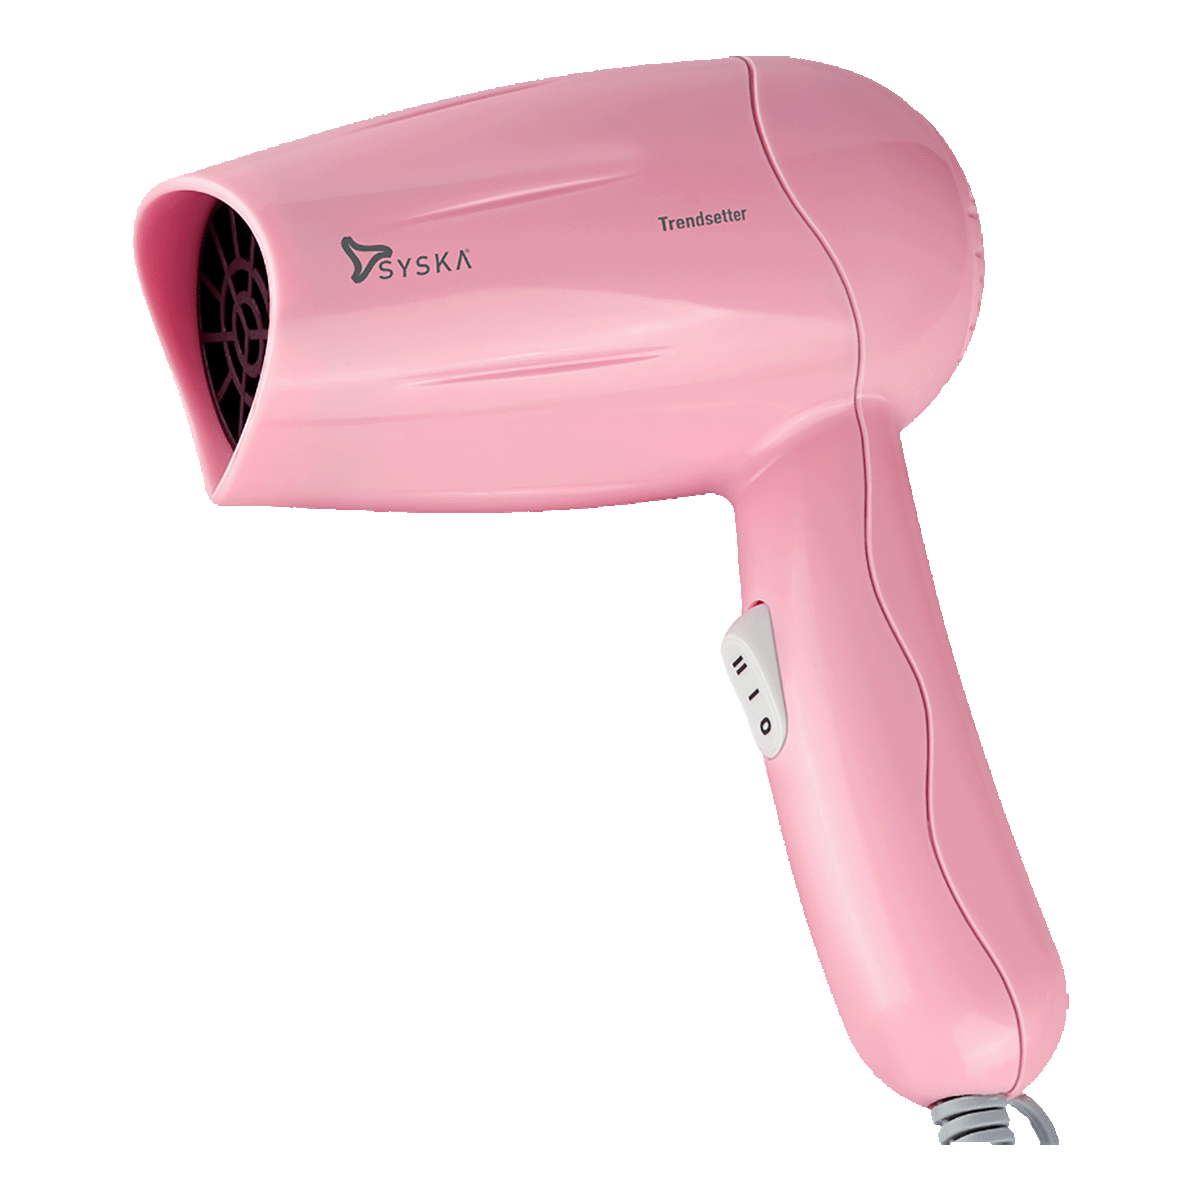 STAR ABS PRO POWERFUL PURPLE HAIR DRYER WITH PROFESSIONAL FEATURES Hair  Dryer Price in India Full Specifications  Offers  DTashioncom